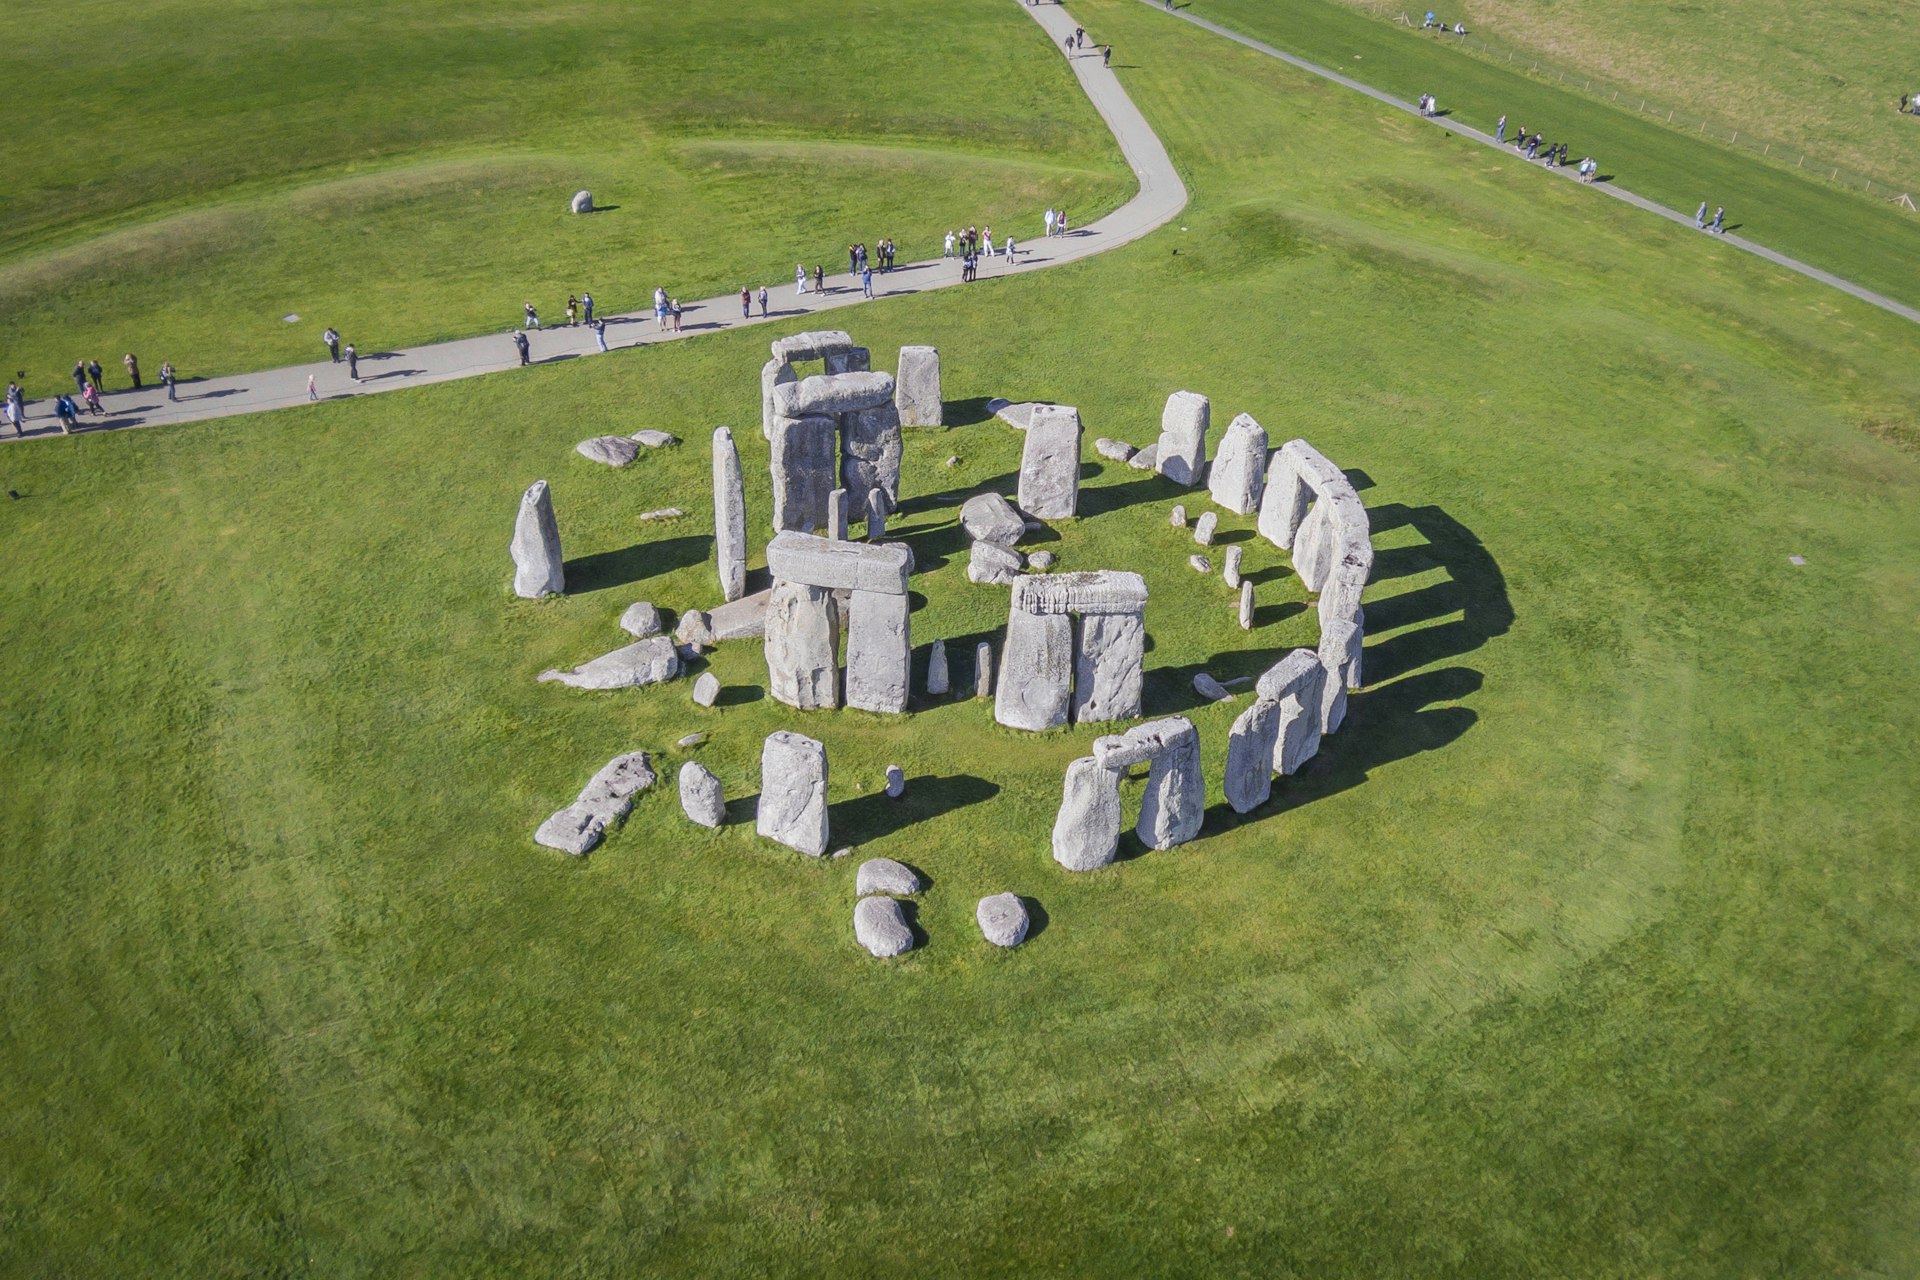 Aerial shot of Stonehenge, a collection of giant grey stones arranged in two circles. There are some visitors at the site, who seem tiny when compared to the size of the stones